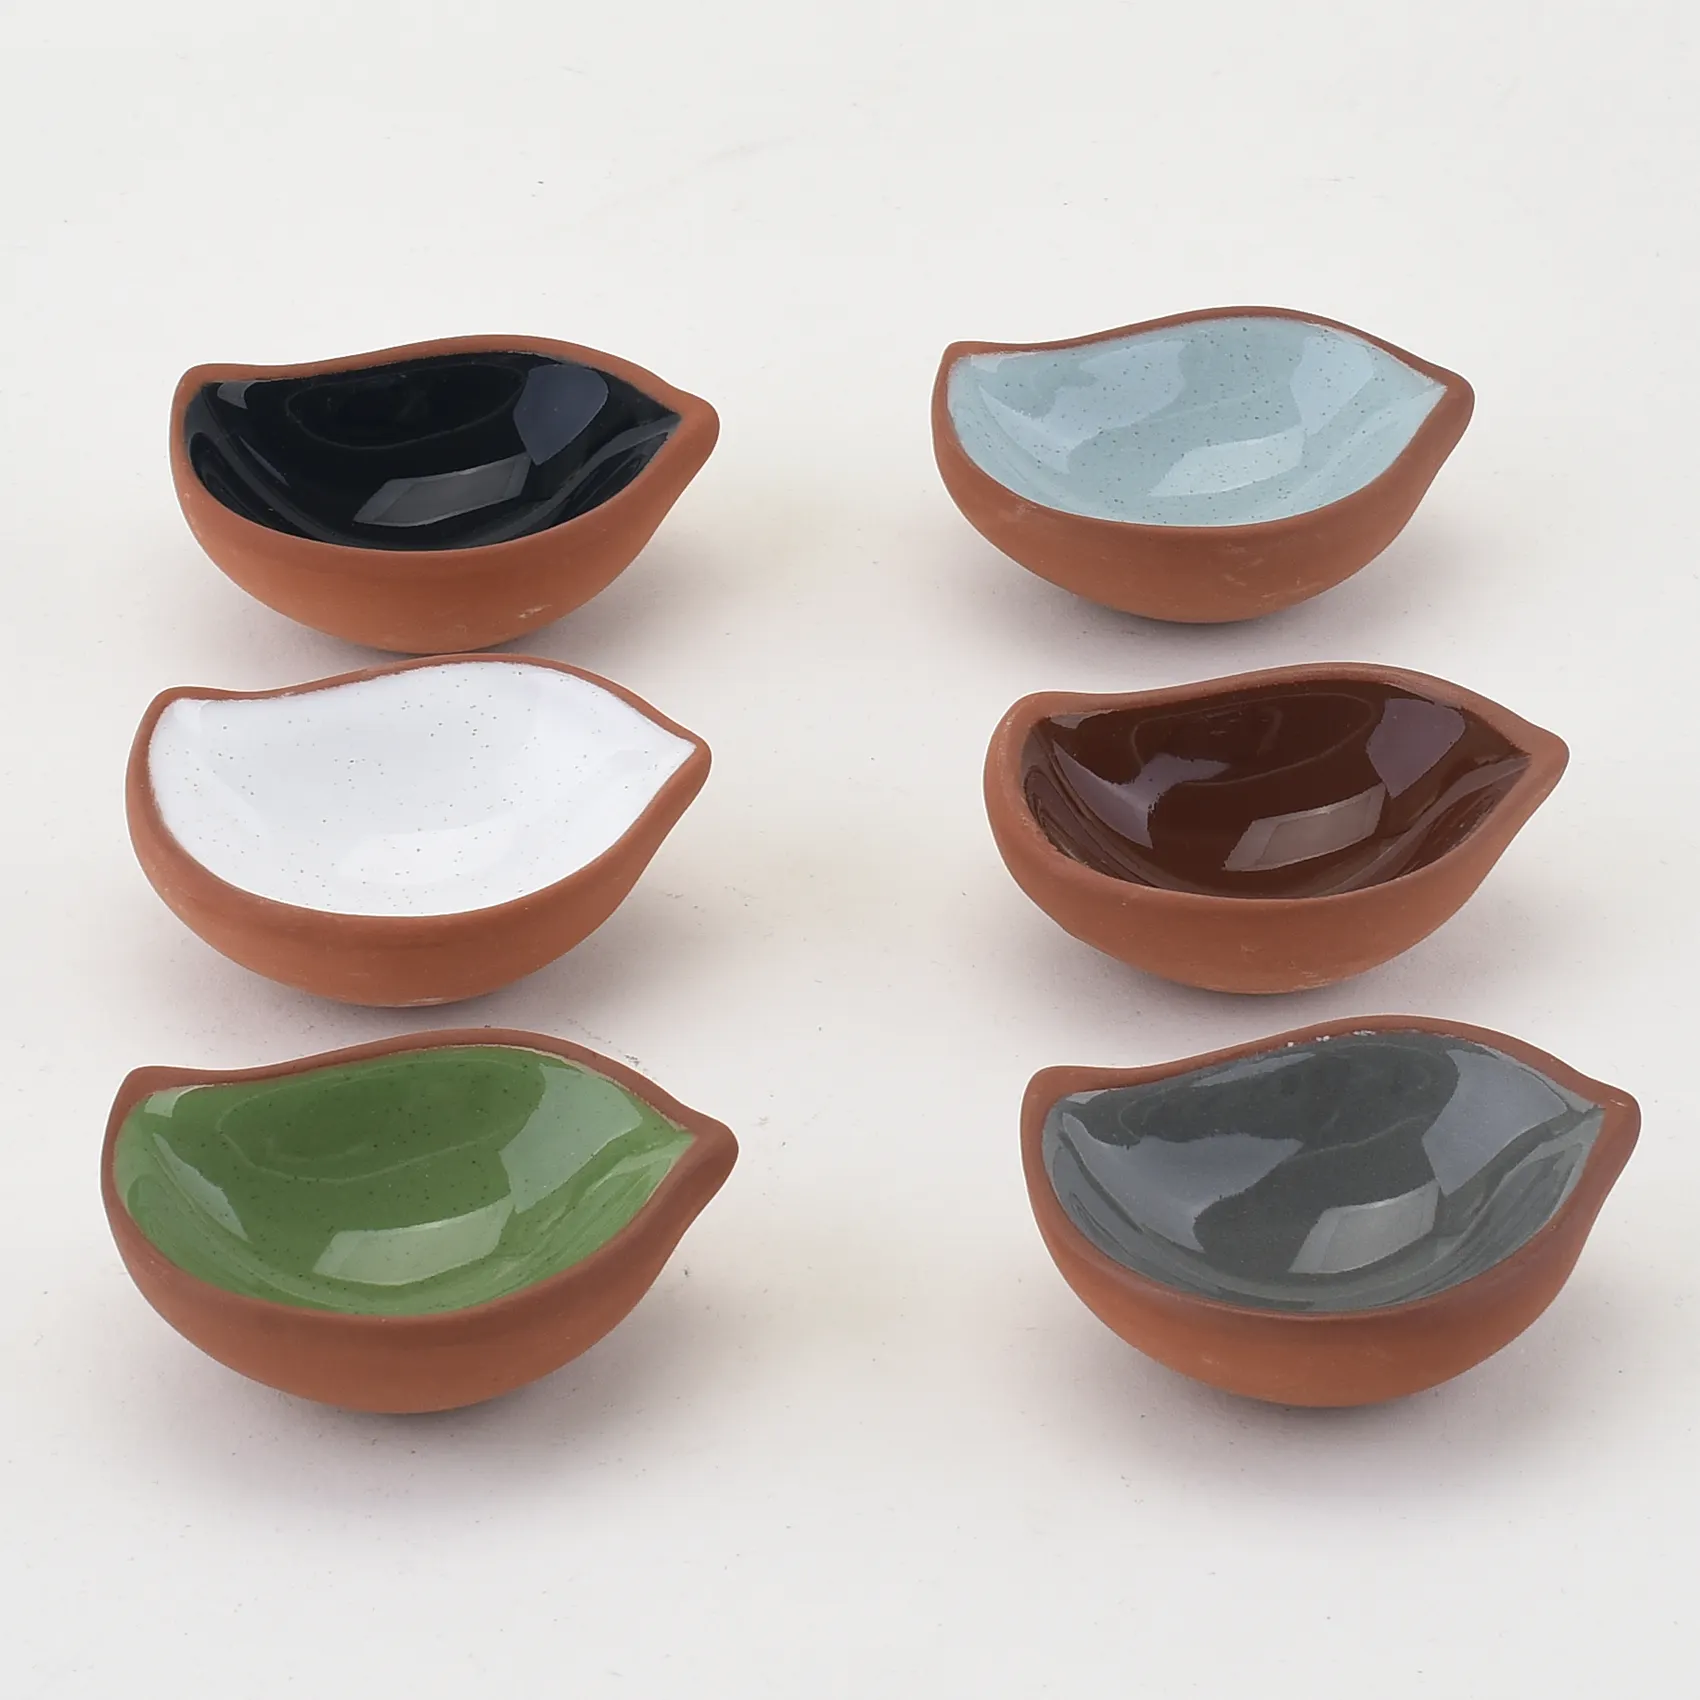 Sauce Bowl Terracotta Sauce Dish Round Shape Ceramic Soy Sauce Dishes Mixed Color Dipping Bowls Mini Seasoning Dish Appetizer Plates